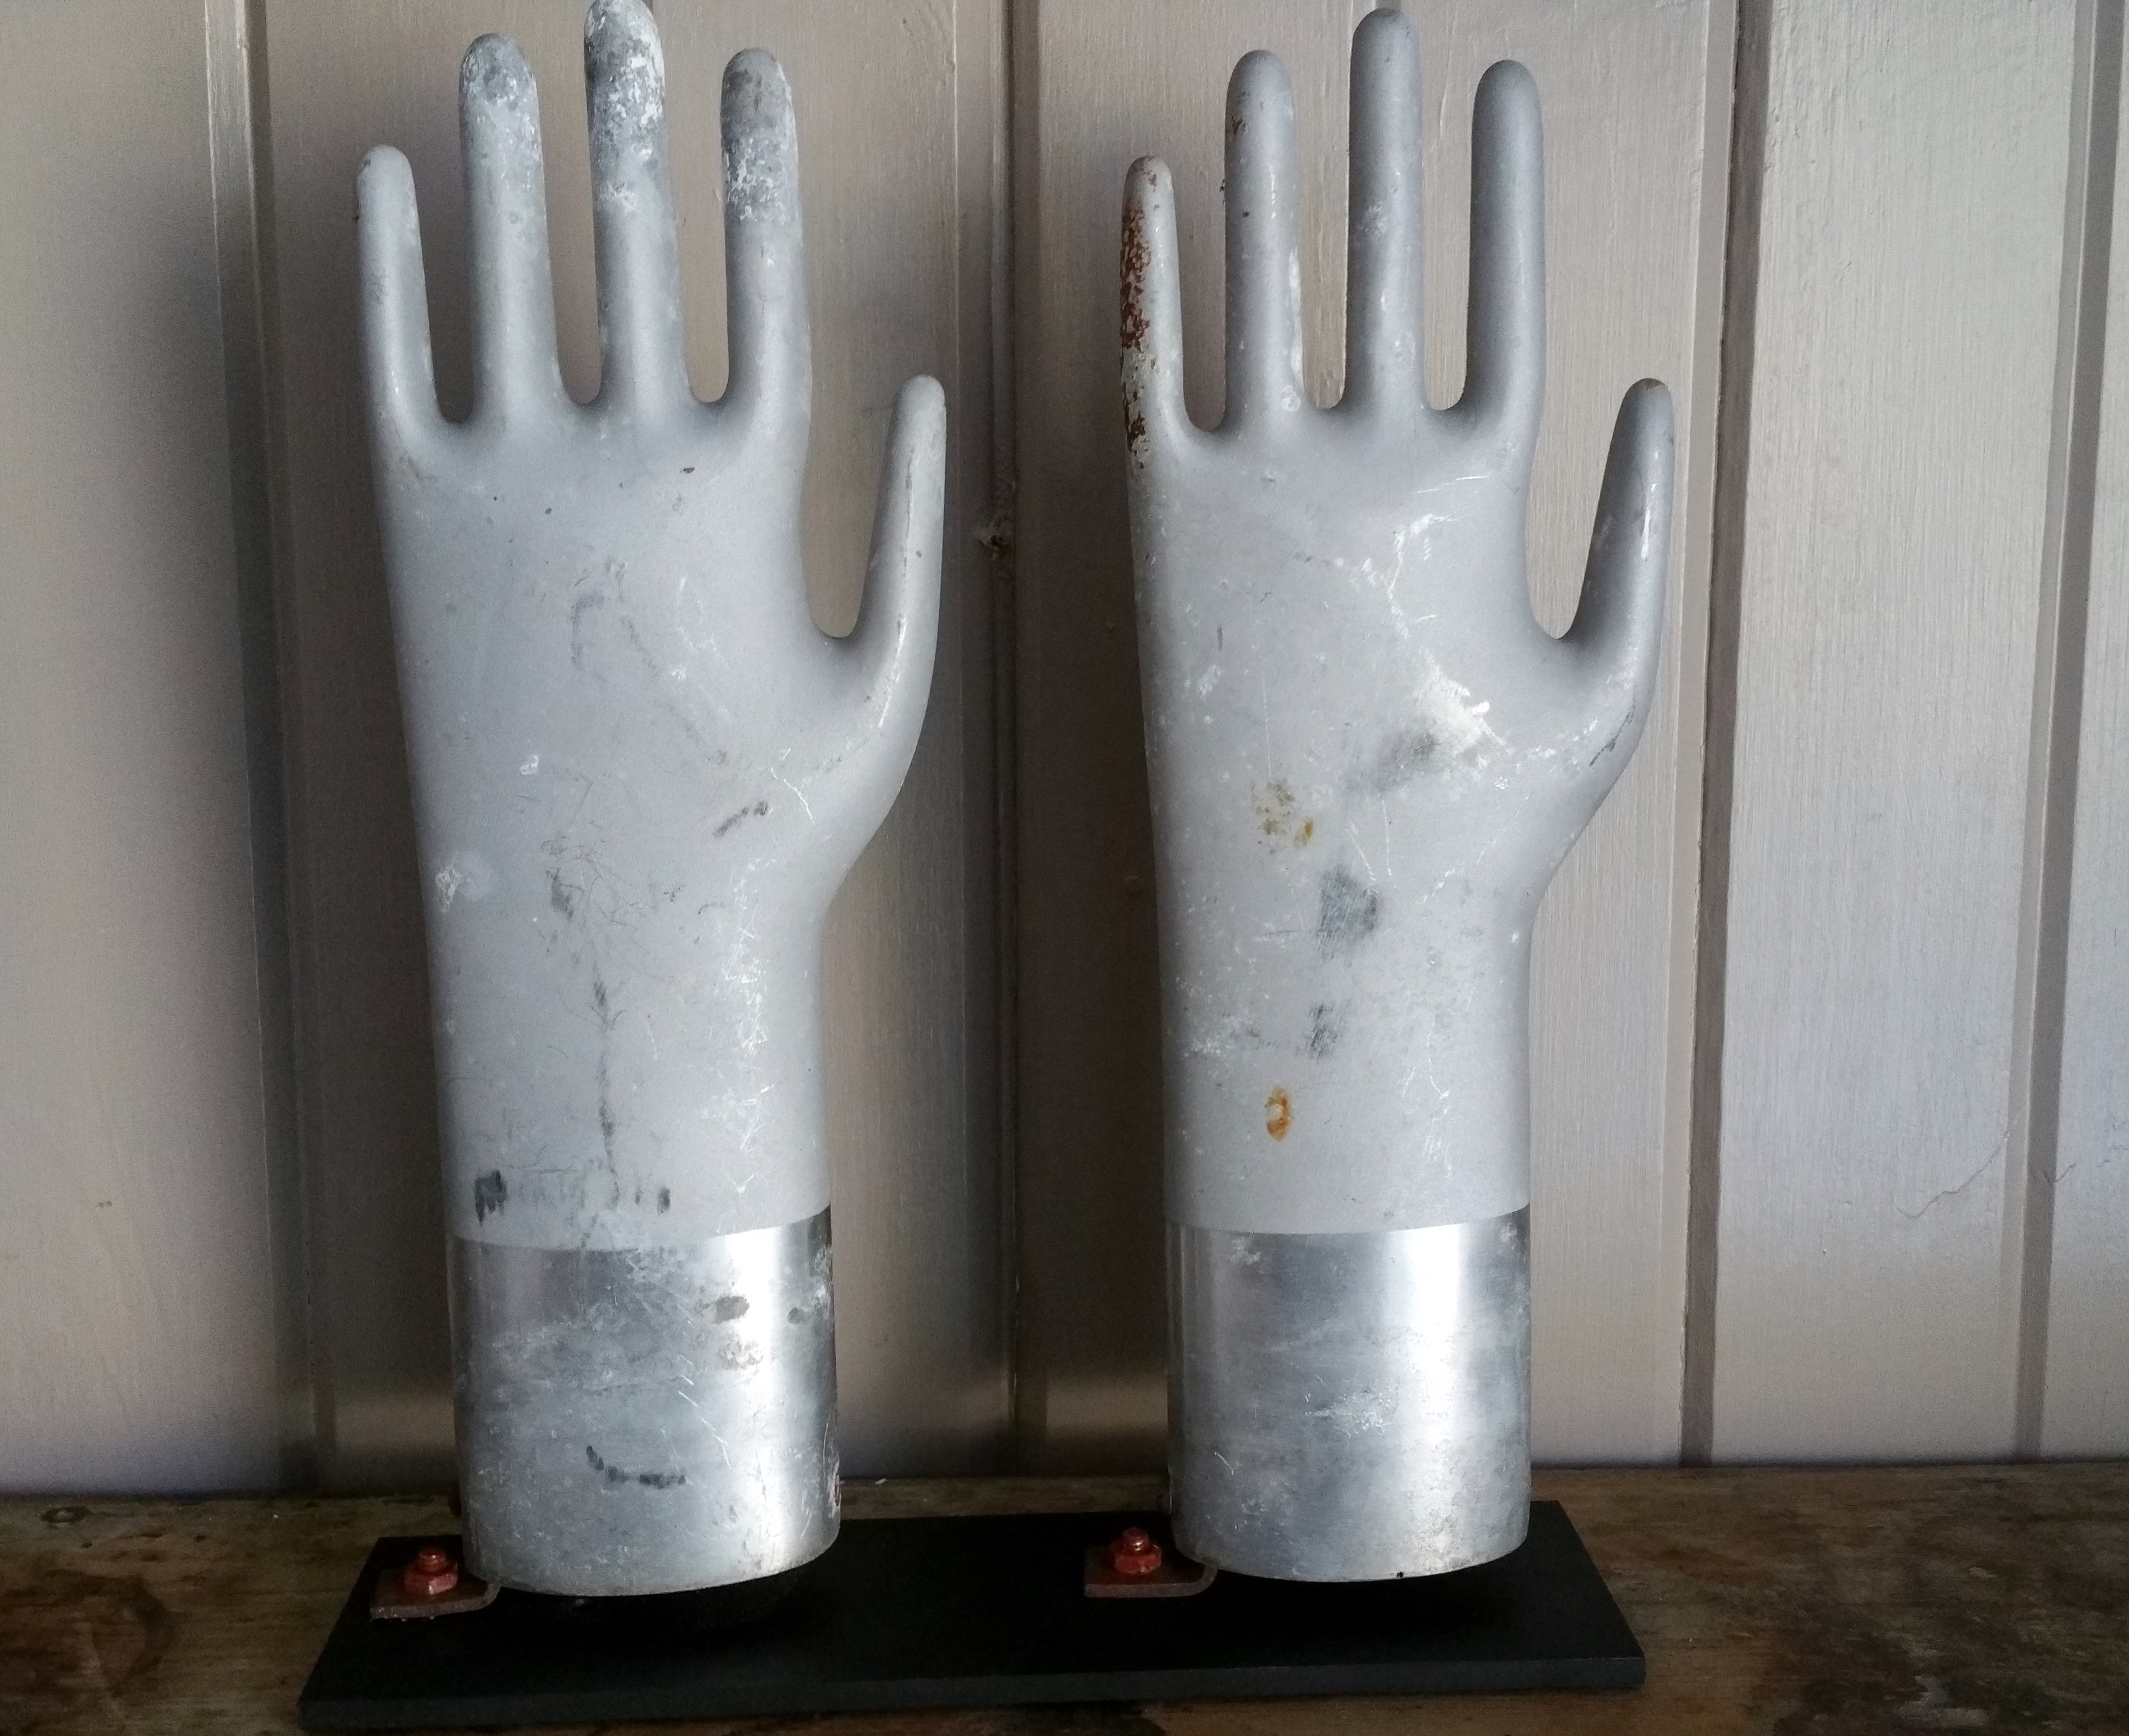 2 MOLDS IN THE SHAPE OF HANDS